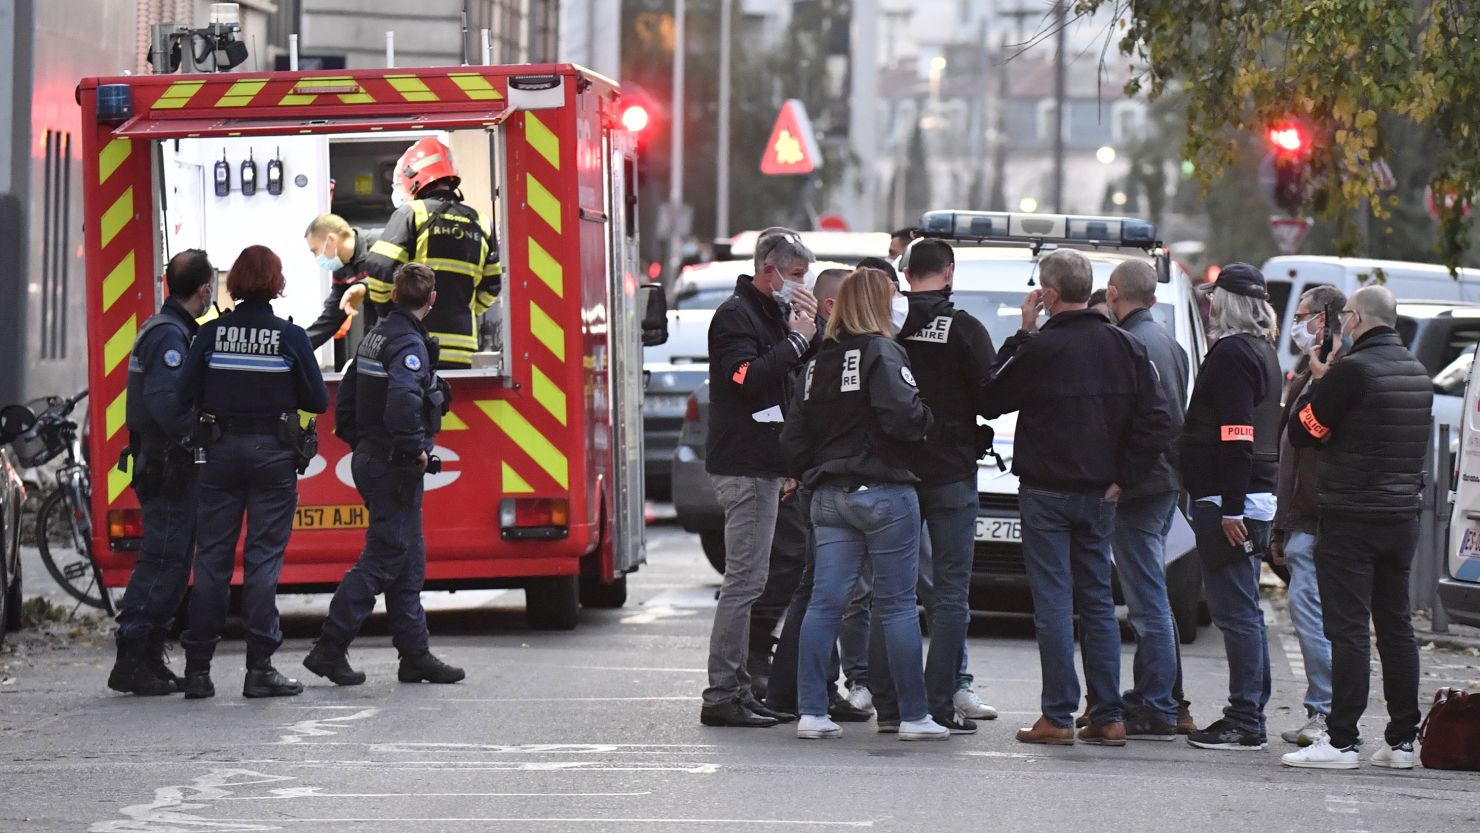 Security and emergency personnel respond to the shooting in Lyon on Saturday.